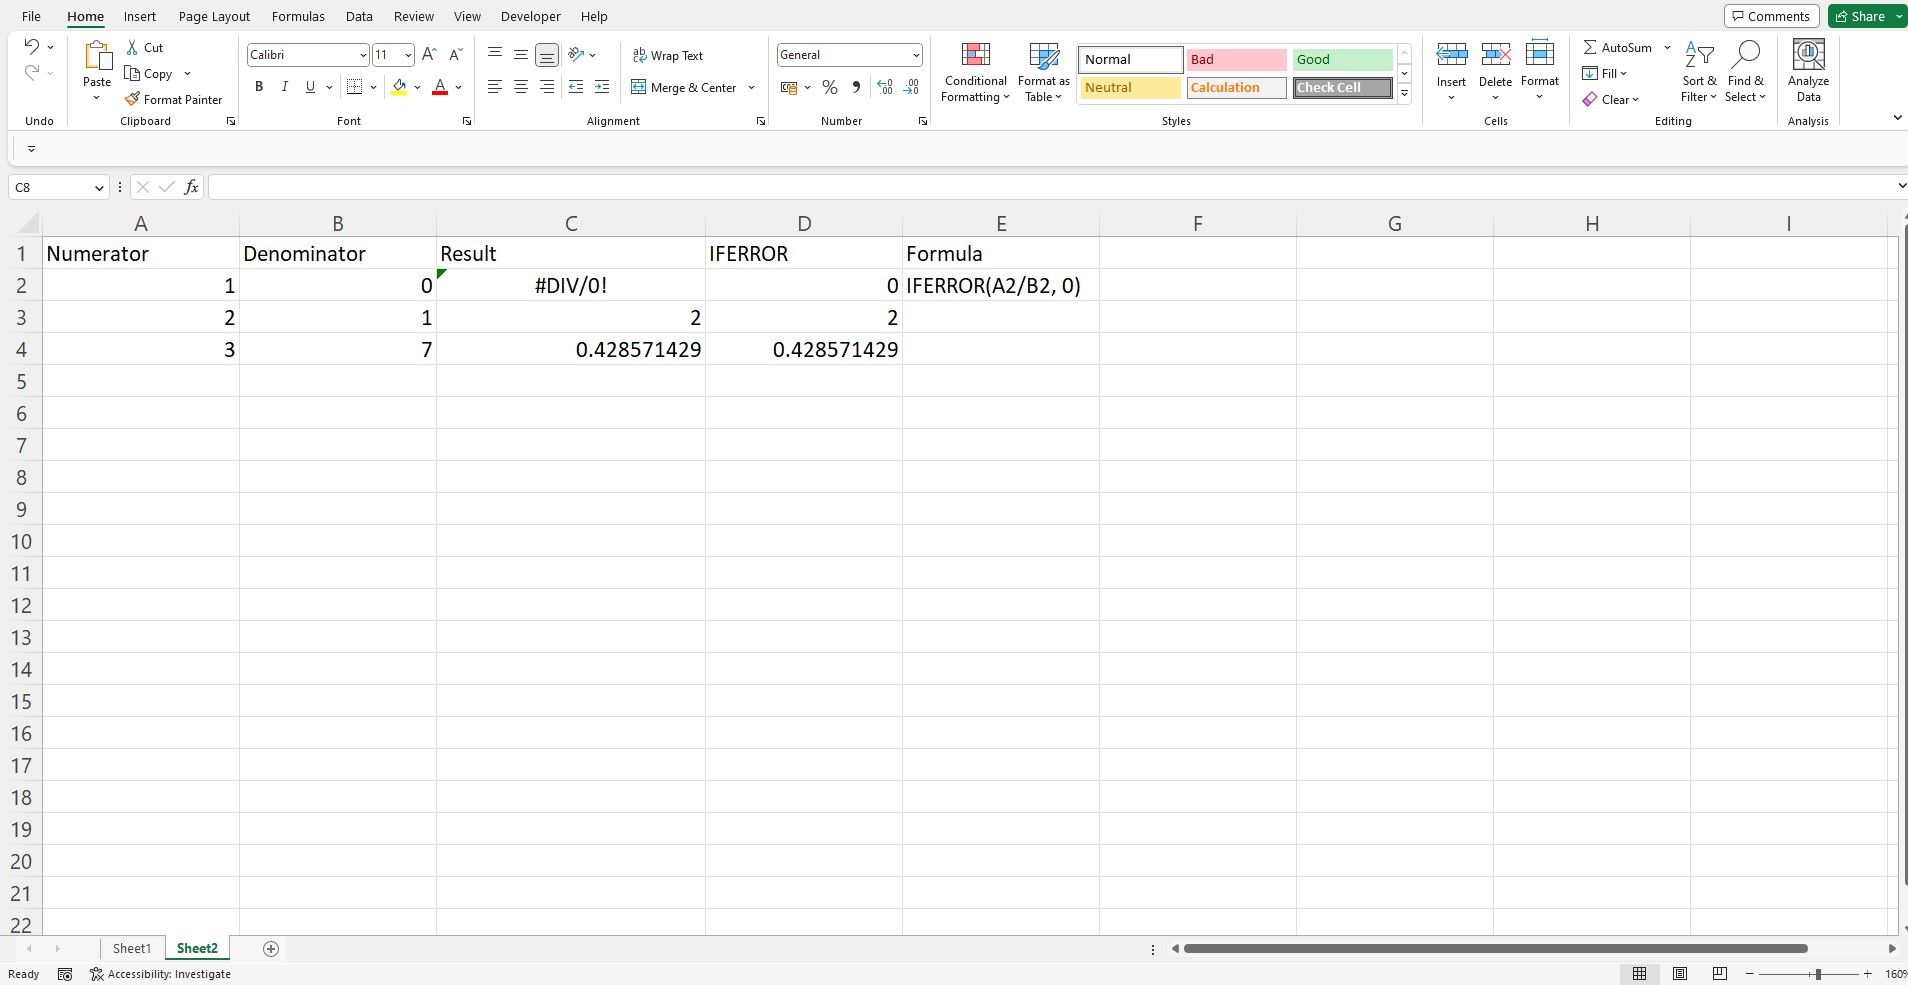 Sample data and IFERROR function formula in an Excel spreadsheet